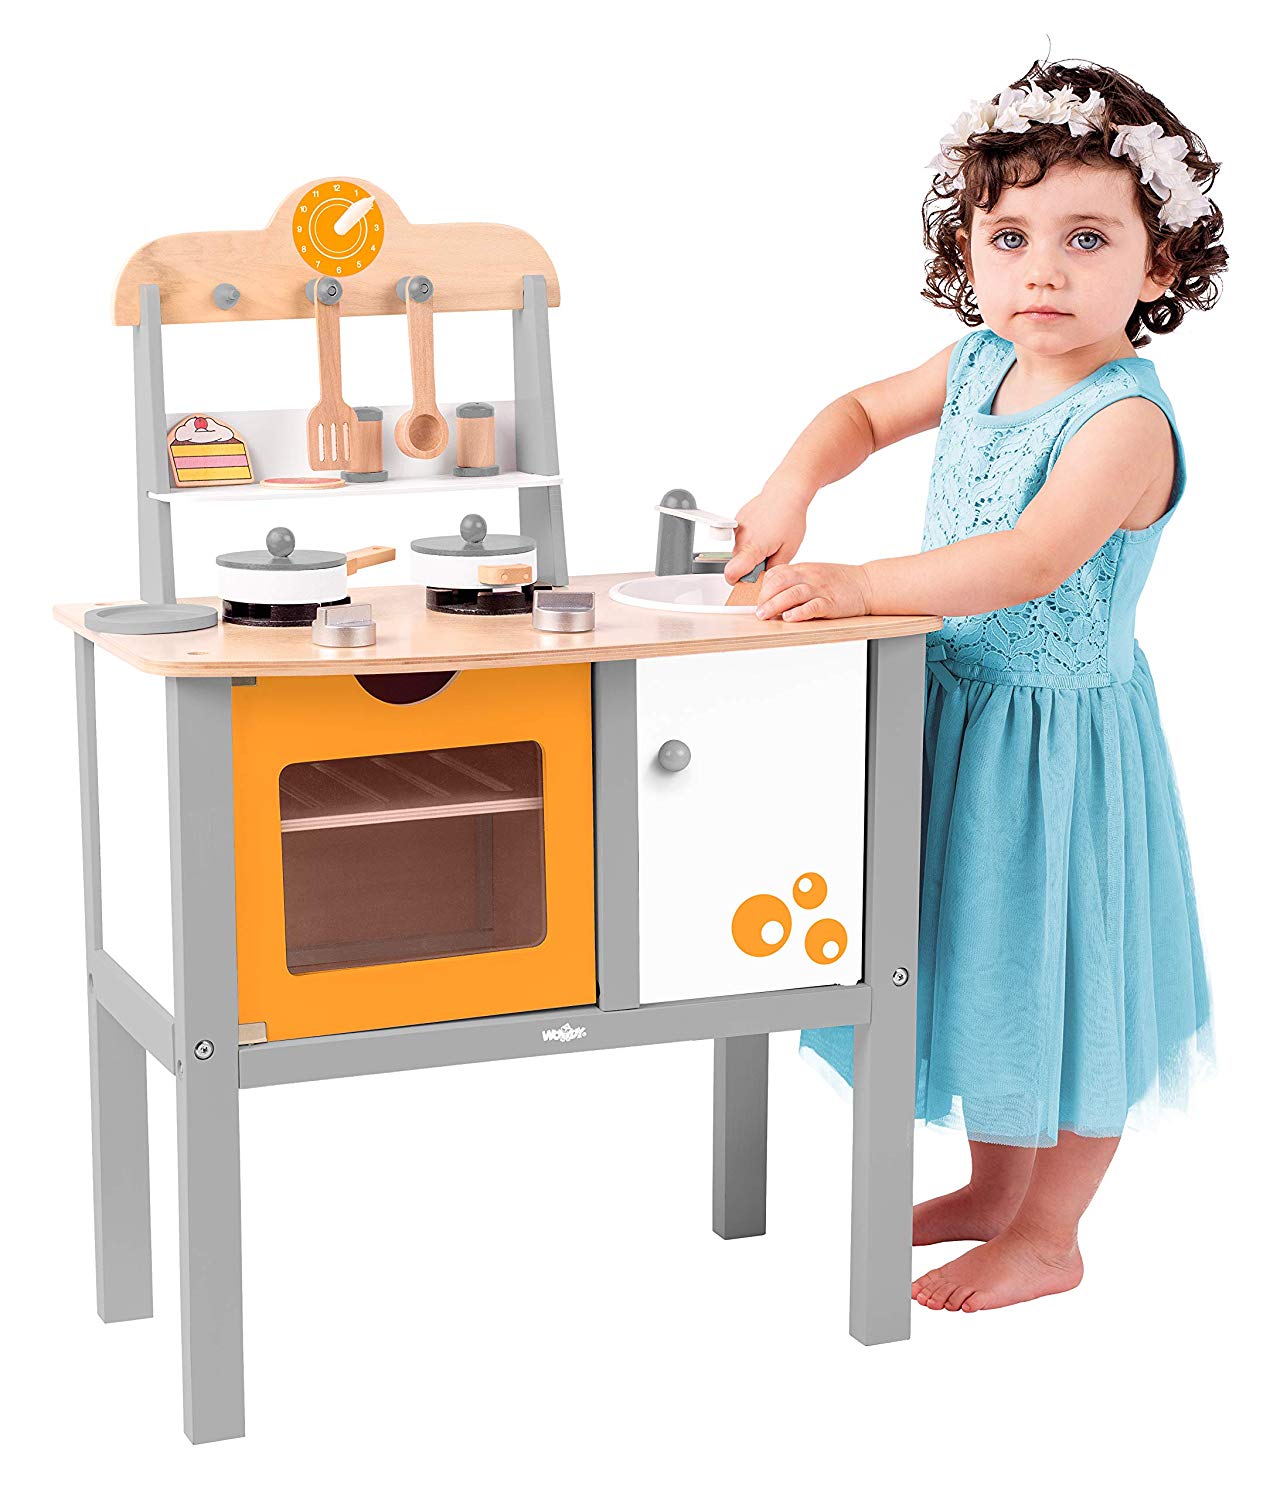 Hape International Woody "Buona Cucina Wooden Childrens Kitchen With Accessories. 17 Pieces 